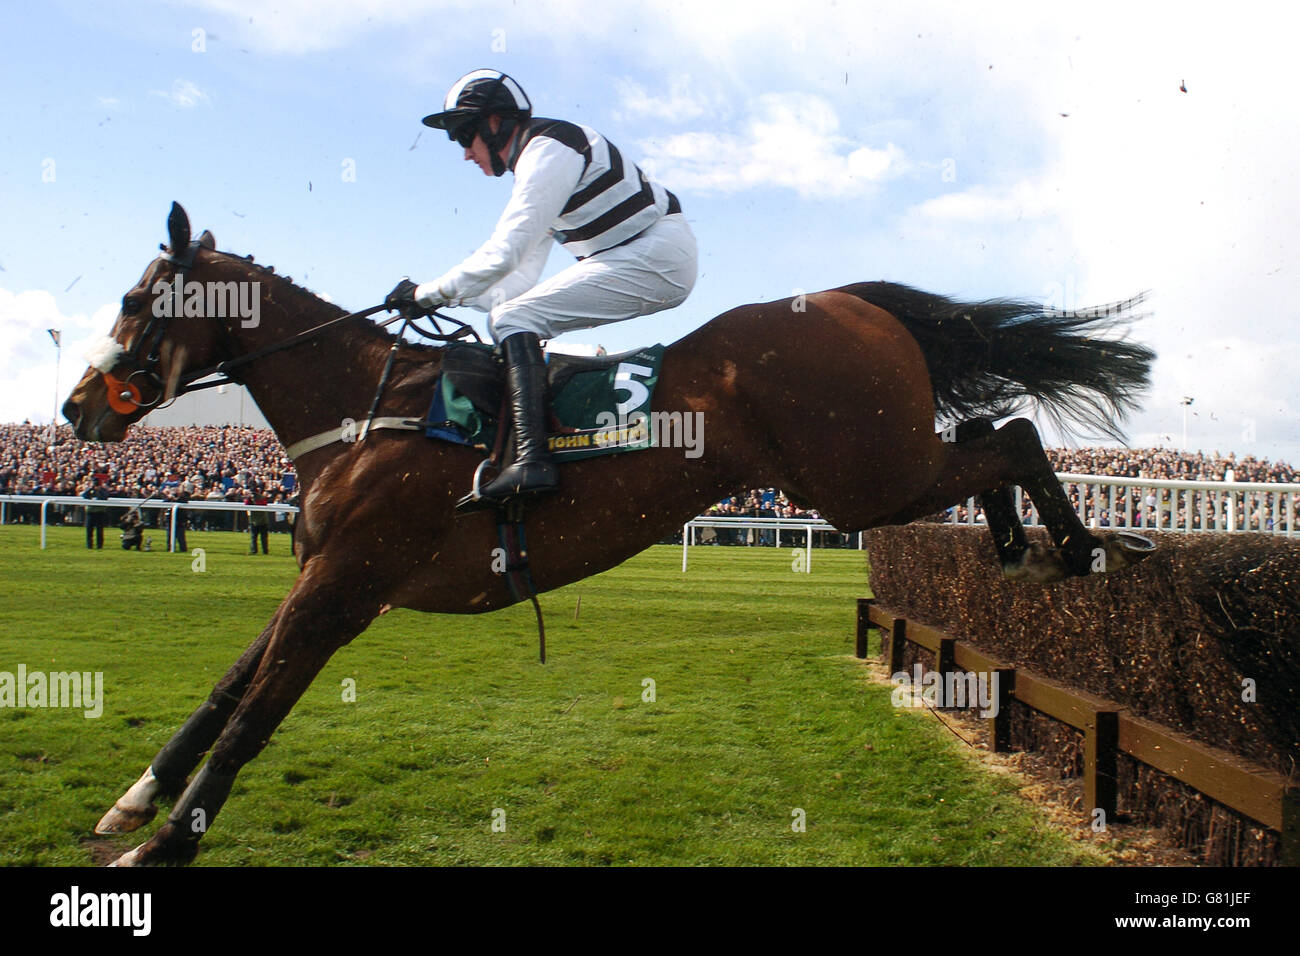 Horse Racing - The John Smith's Grand National Meeting 2005 - Aintree. Moscow Flyer ridden by Barry Geraghty on his way to winning The John Smith's Melling Steeple Chase Stock Photo